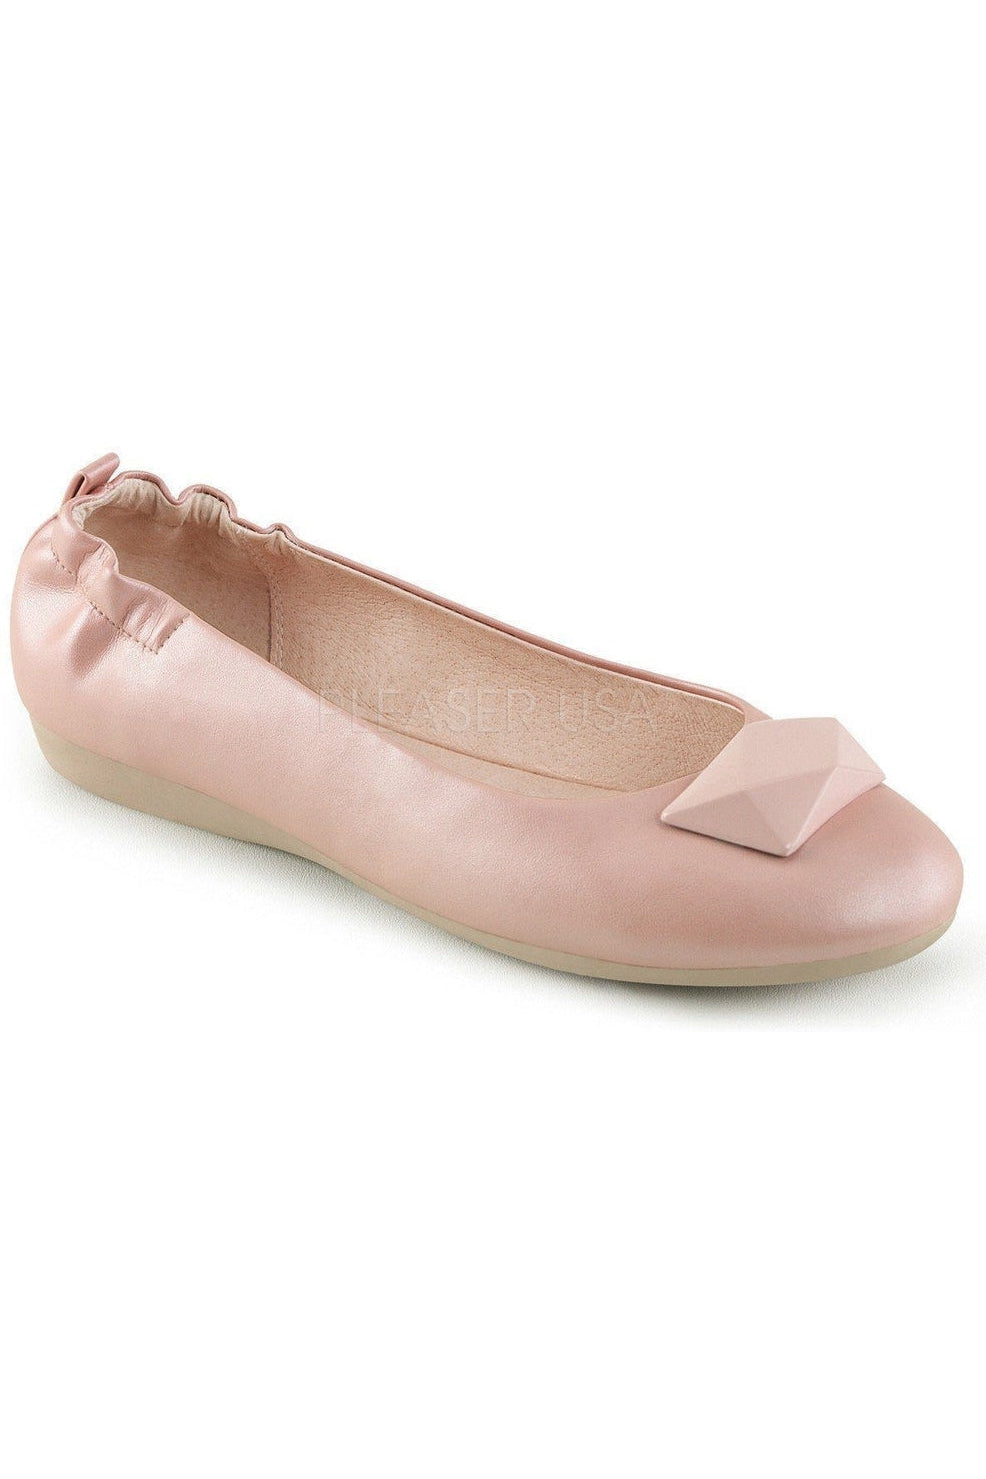 OLIVE-08-Pink-Pin Up Couture-Pink-Flats-SEXYSHOES.COM